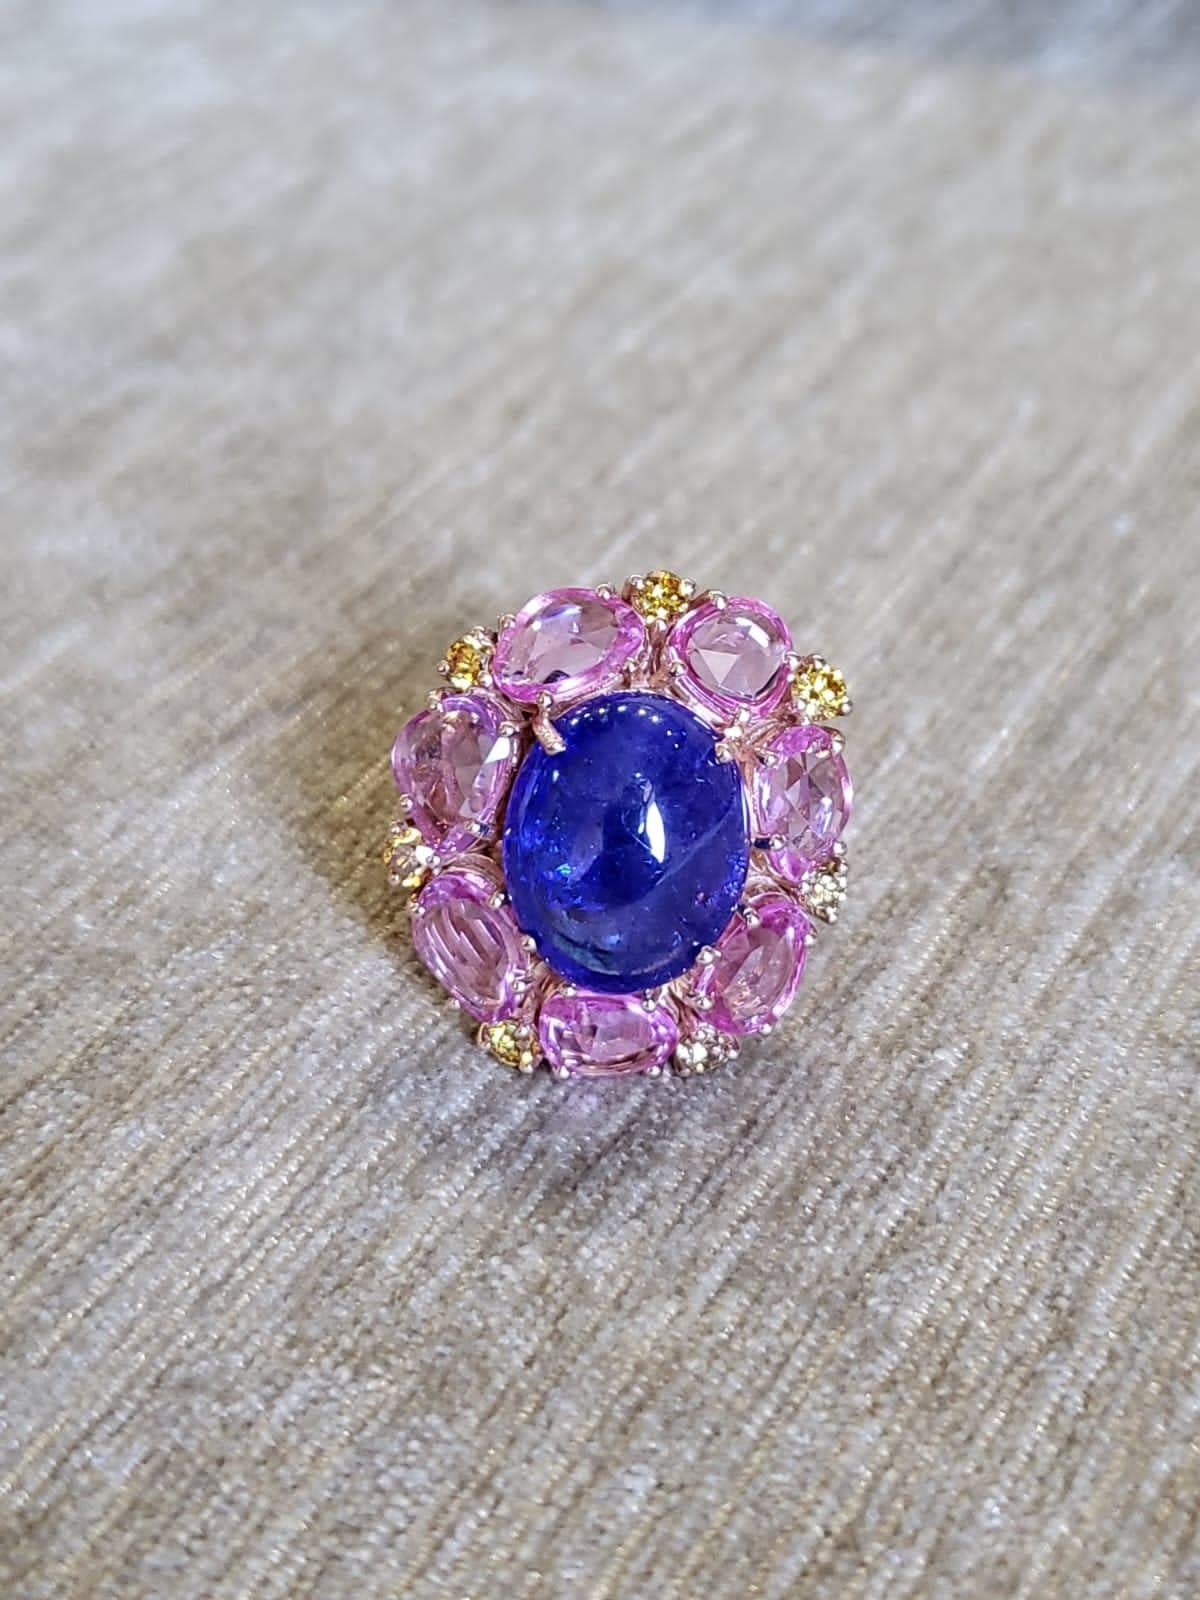 A very gorgeous Tanzanite & Pink Sapphires Cocktail Ring set in 18K Rose Gold & Diamonds. The weight of the Tanzanite Cabochon is 9.21 carats. The Tanzanite is responsibly sourced from Tanzania. The weight of the Pink Sapphires Rose Cuts is 4.71